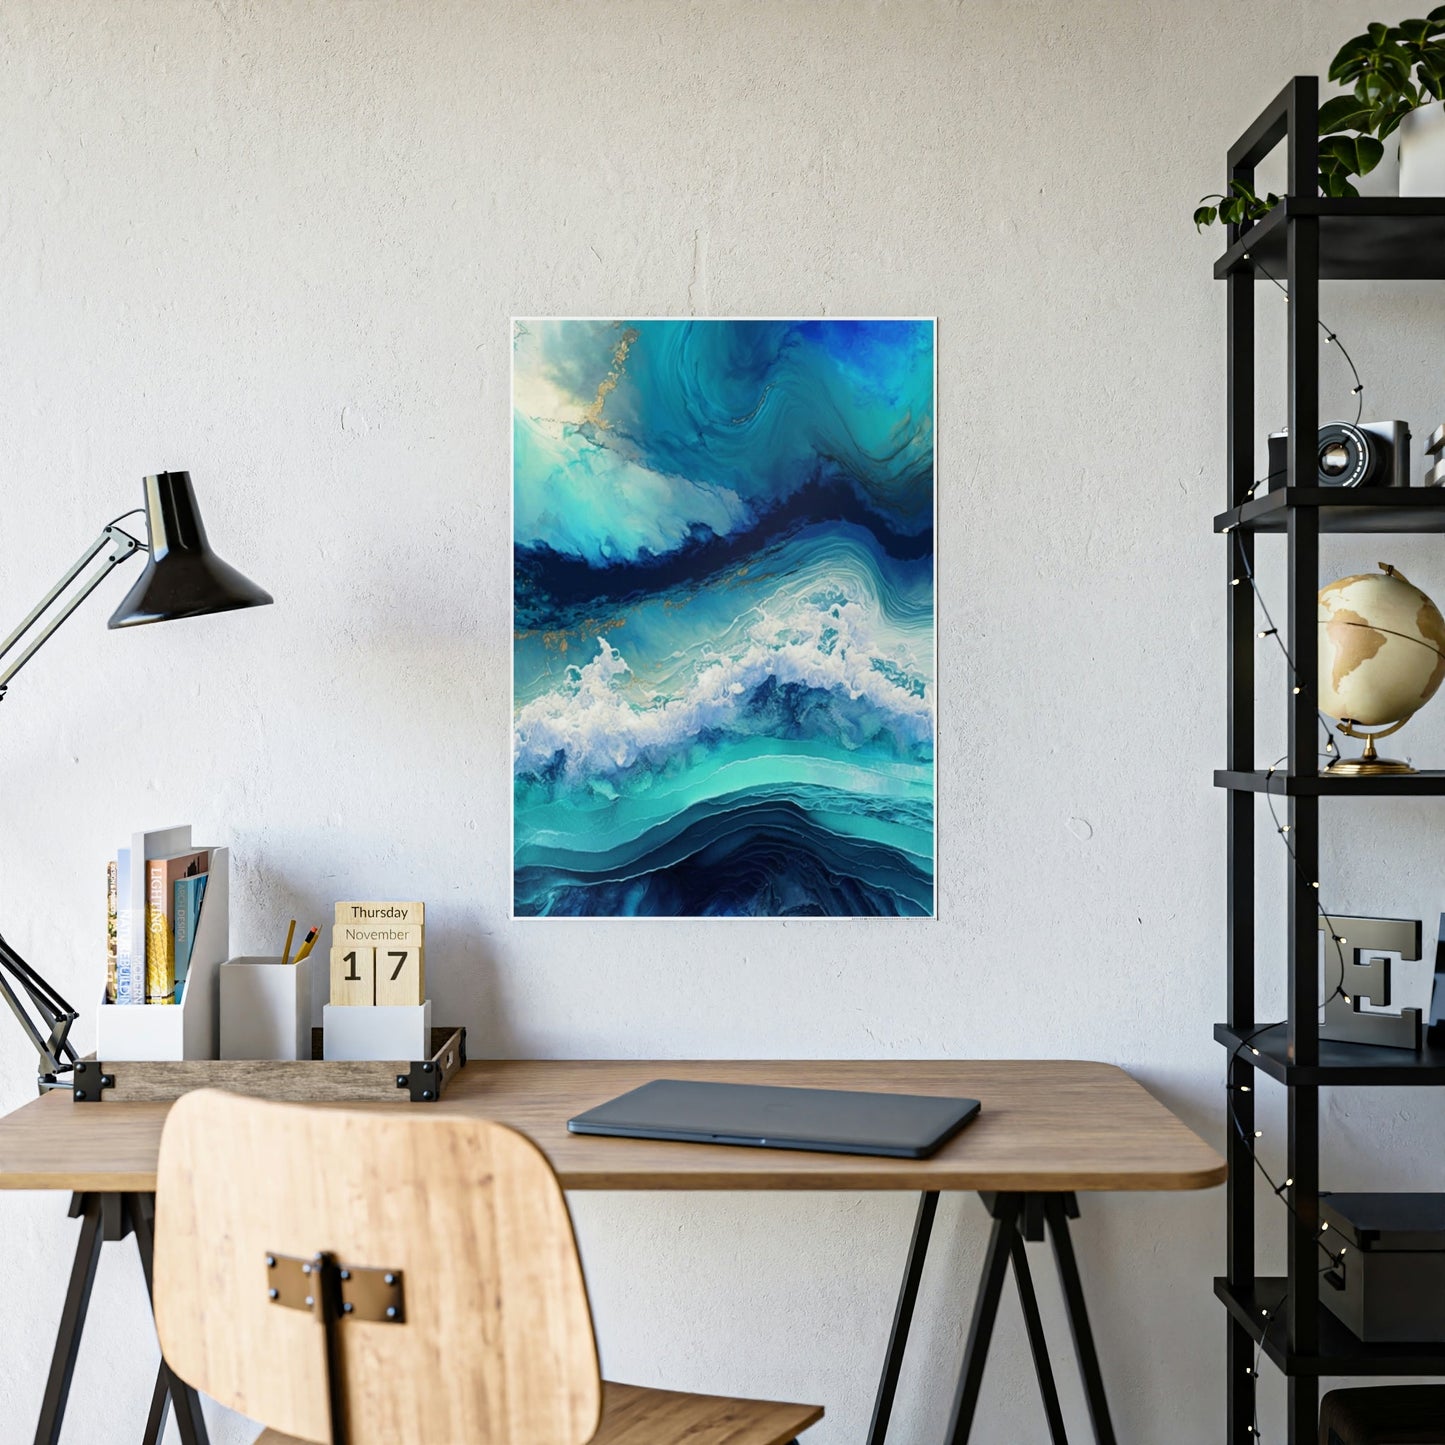 The Serenity of Waves: A Framed Canvas & Poster Artwork of an Ocean View